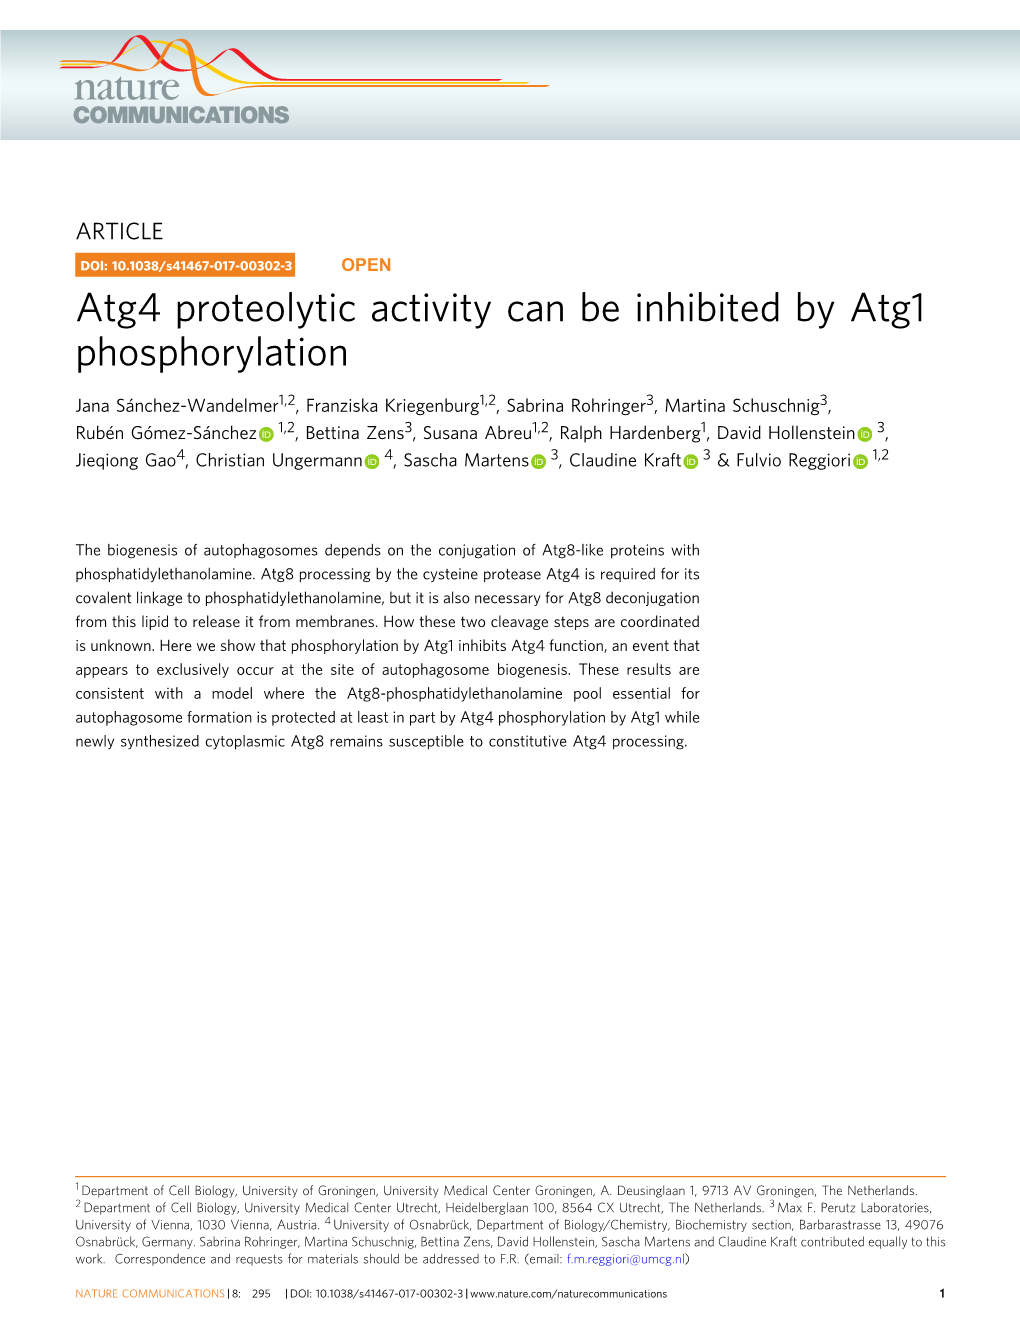 Atg4 Proteolytic Activity Can Be Inhibited by Atg1 Phosphorylation